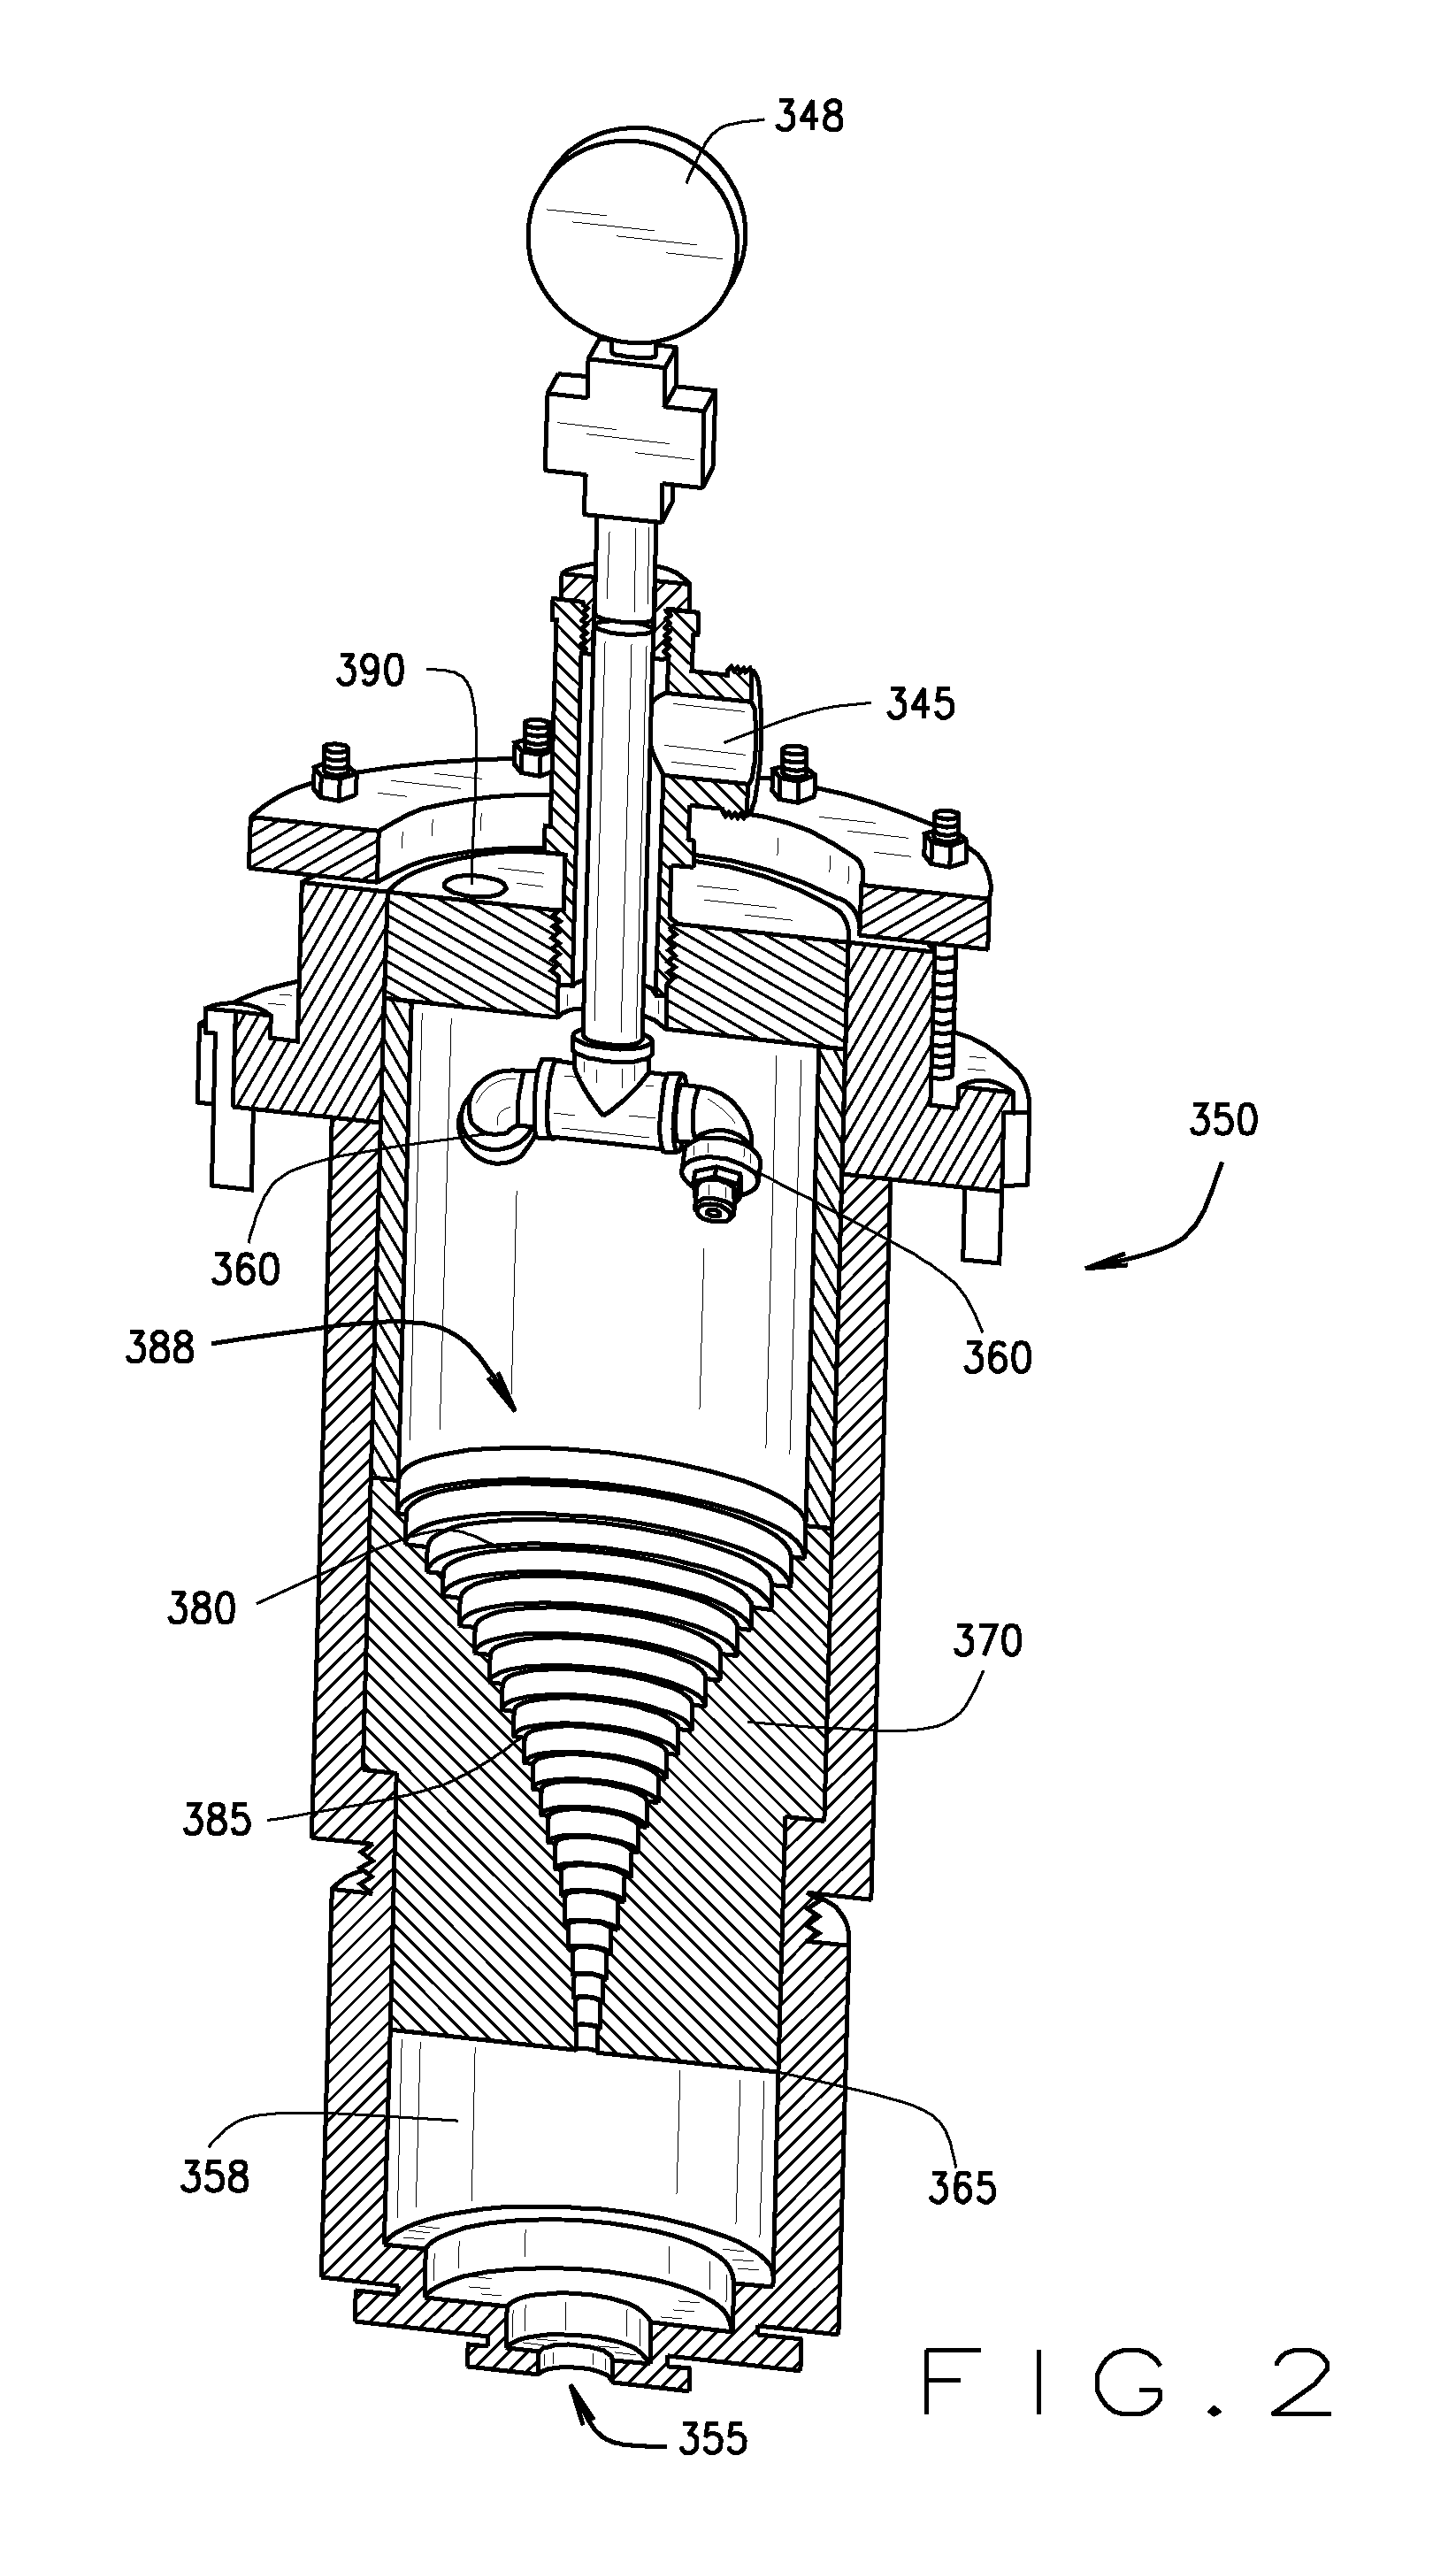 Reaction vessel for an ozone cleaning system